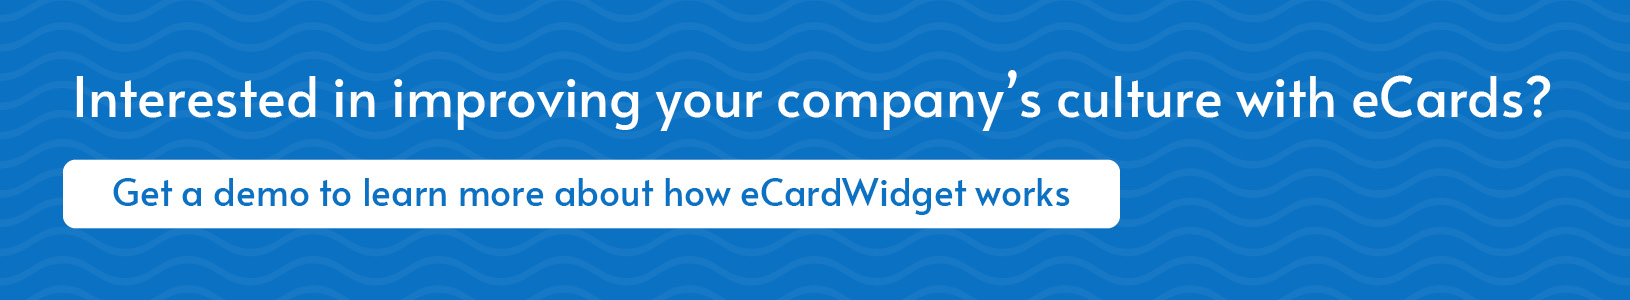 Click this graphic to get an eCardWidget demo so you can improve your company culture with eCards.